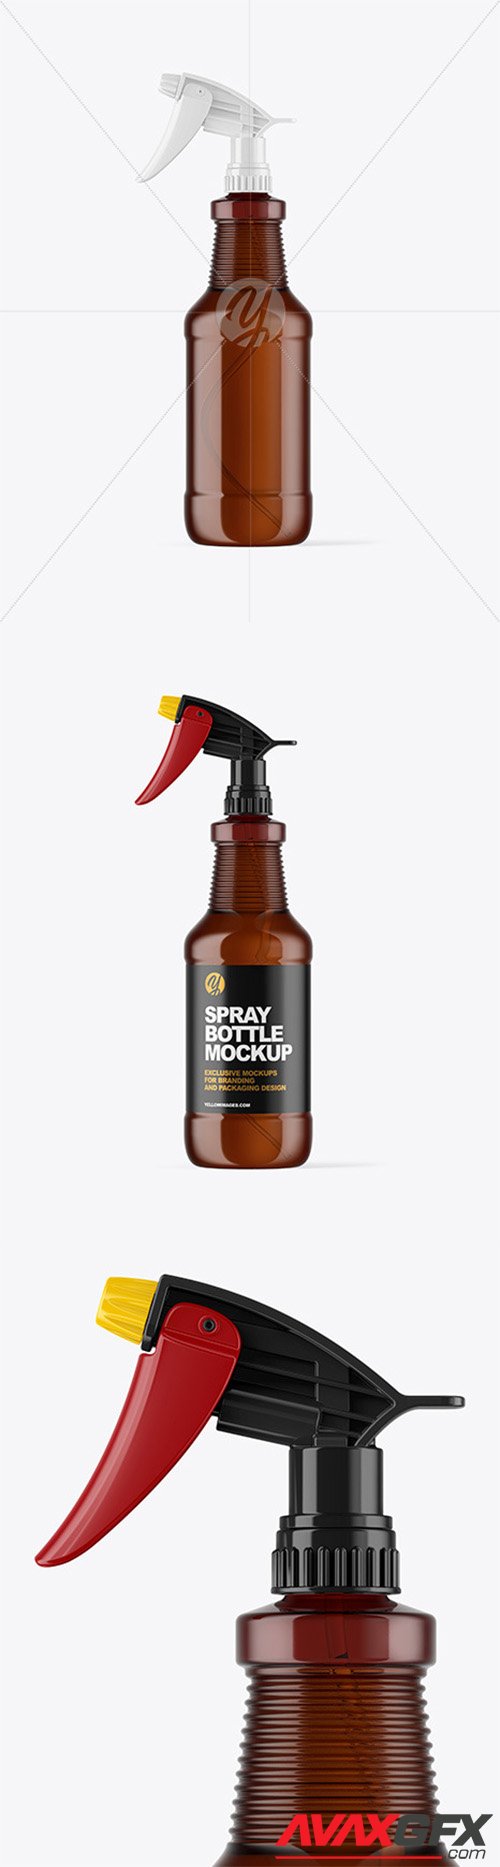 Amber Spray Bottle Mockup 66581 » AVAXGFX - All Downloads that You Need